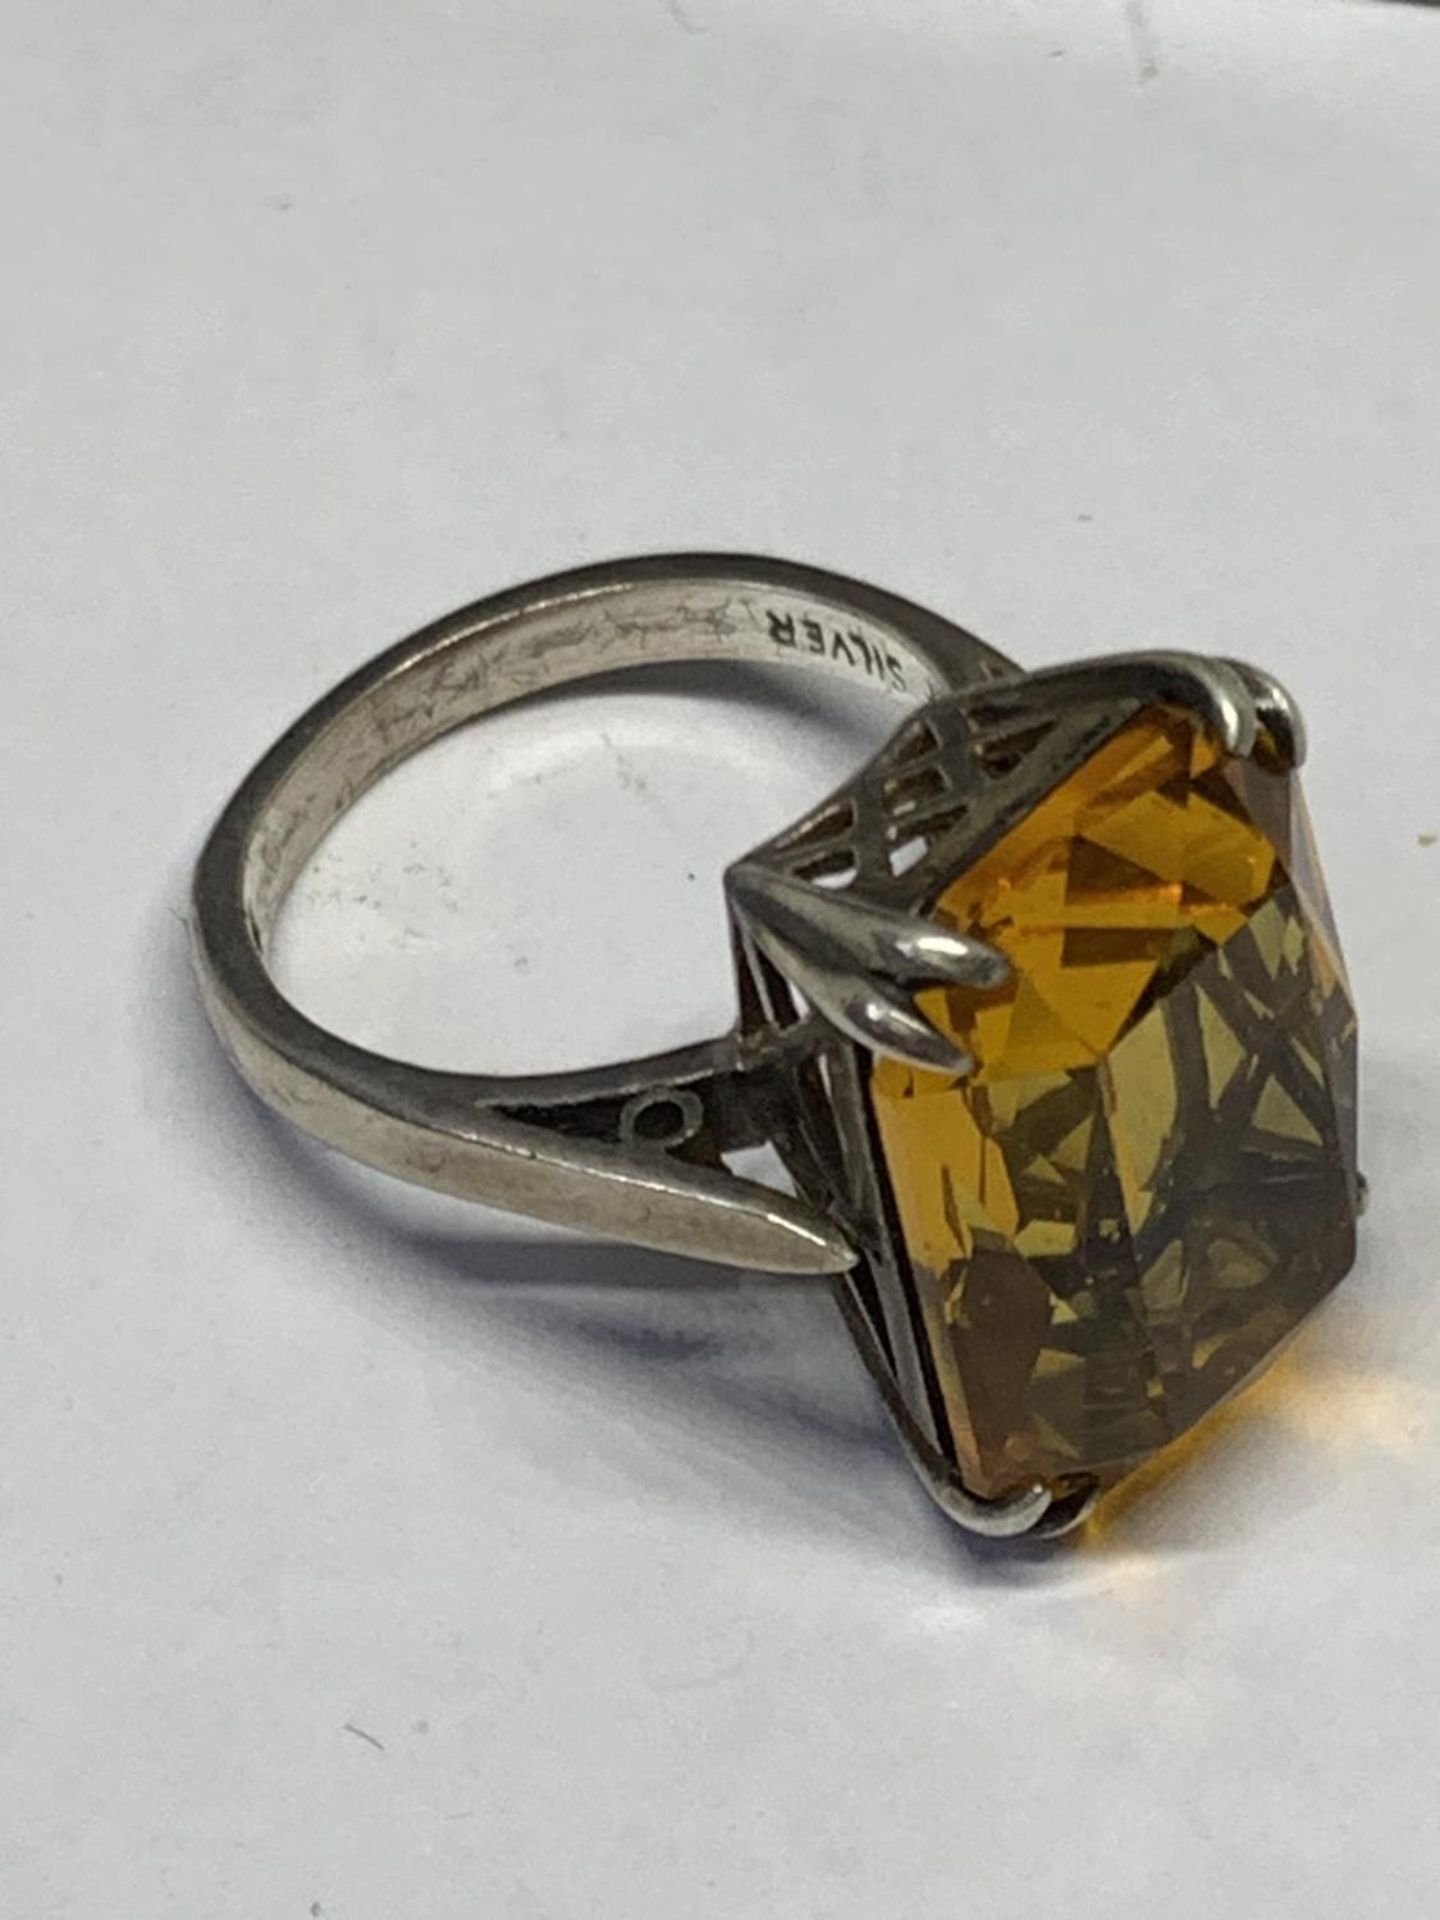 A SILVER AND YELLOW STONE RING IN A PRESENTATION BOX - Image 2 of 3